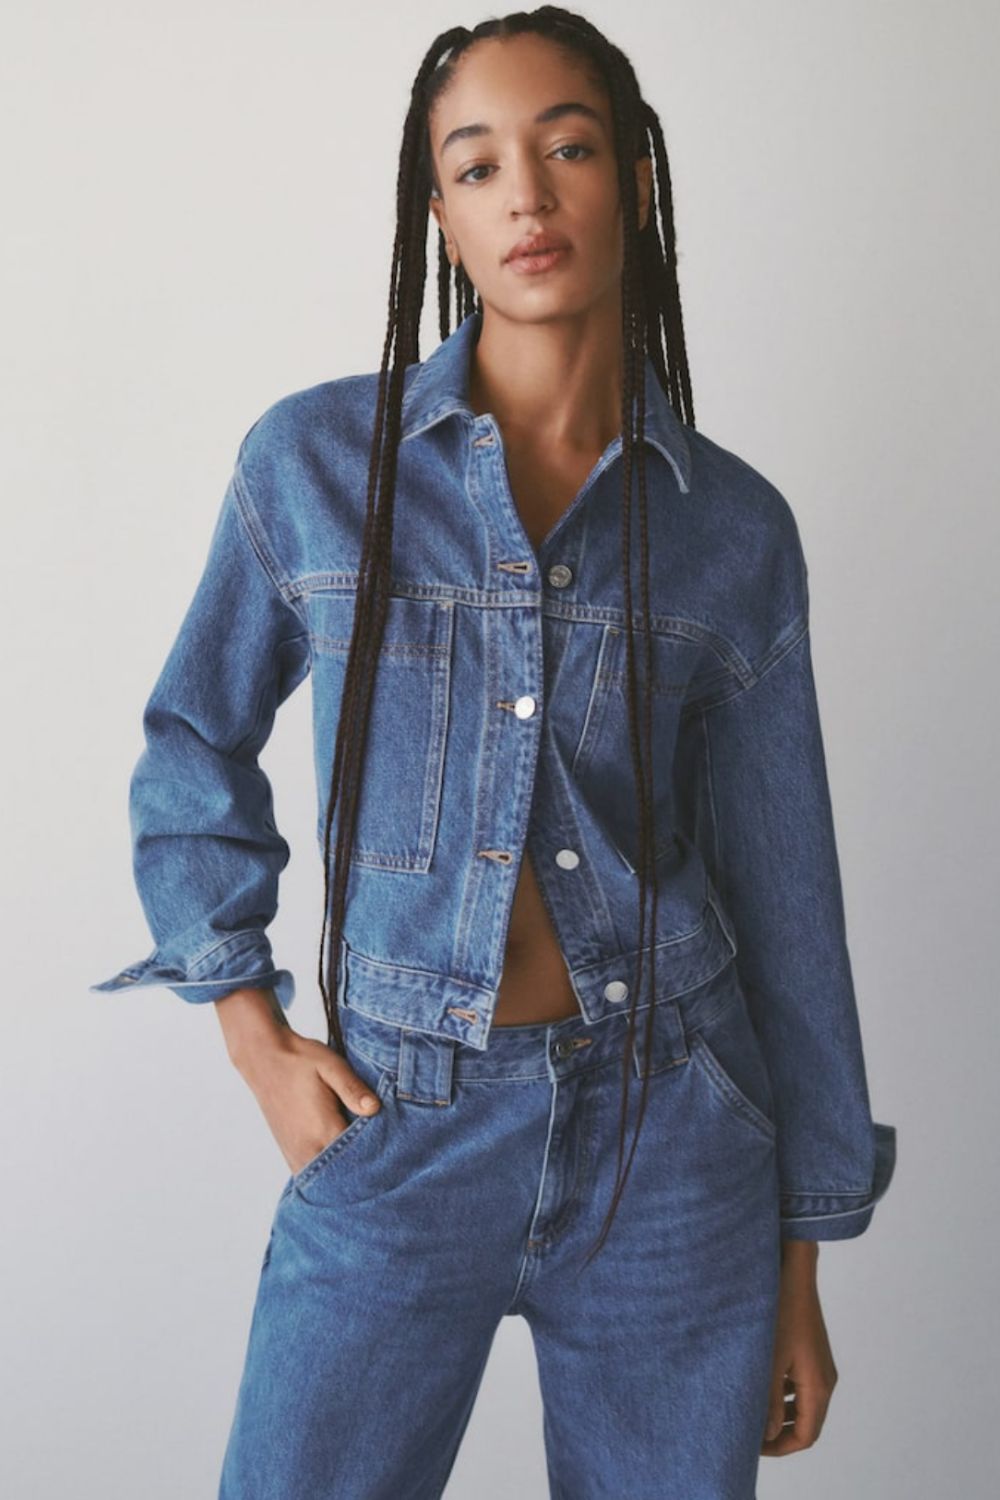 Mango just launched a circular denim collection | Marie Claire UK